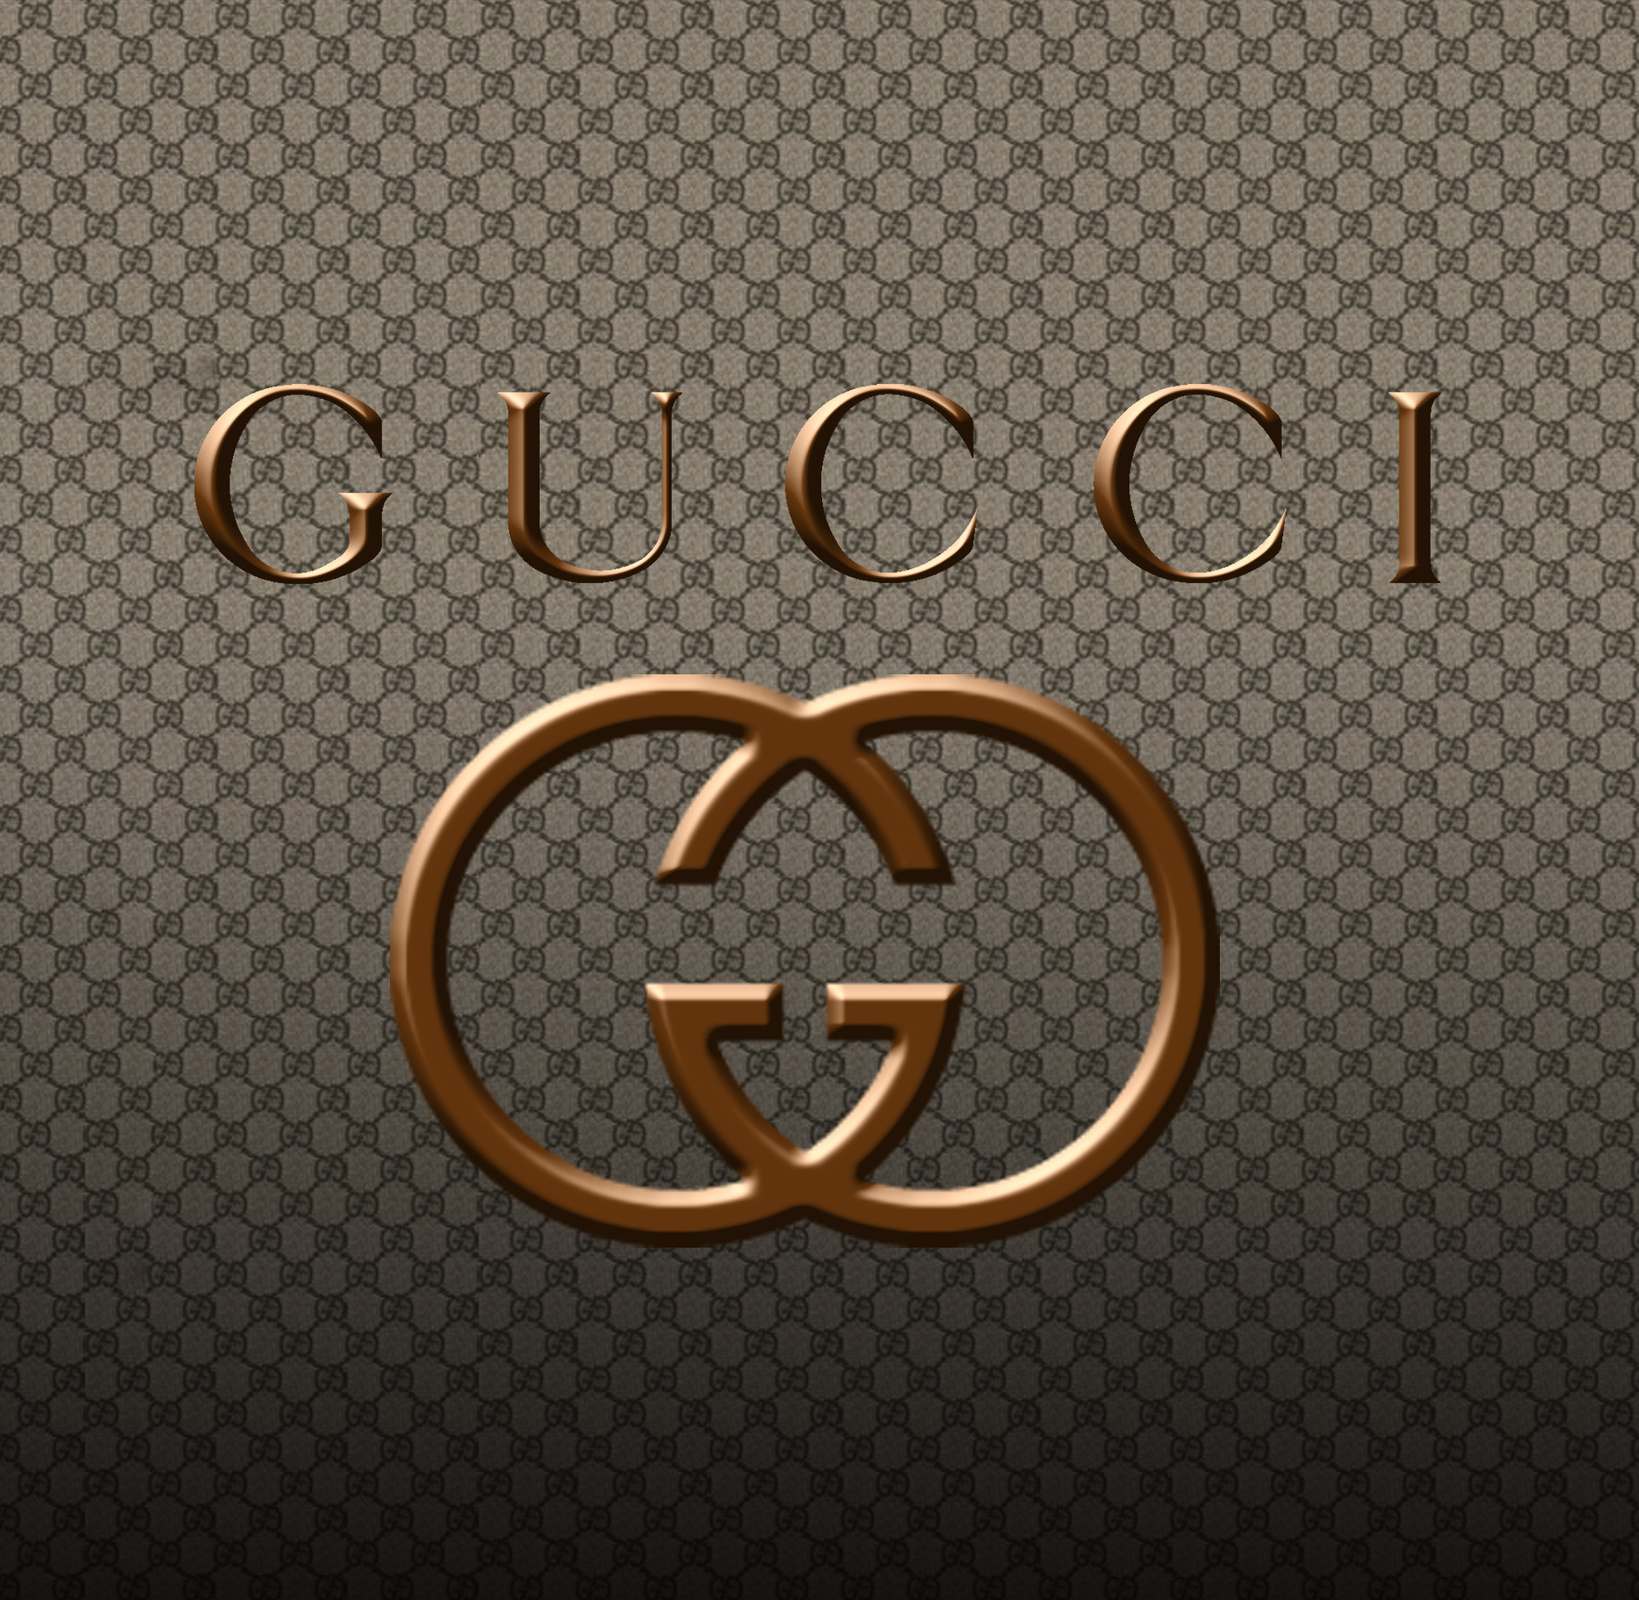 Trouble For Gucci! Former Employee Sues Global Brand Over Sexual Harassment